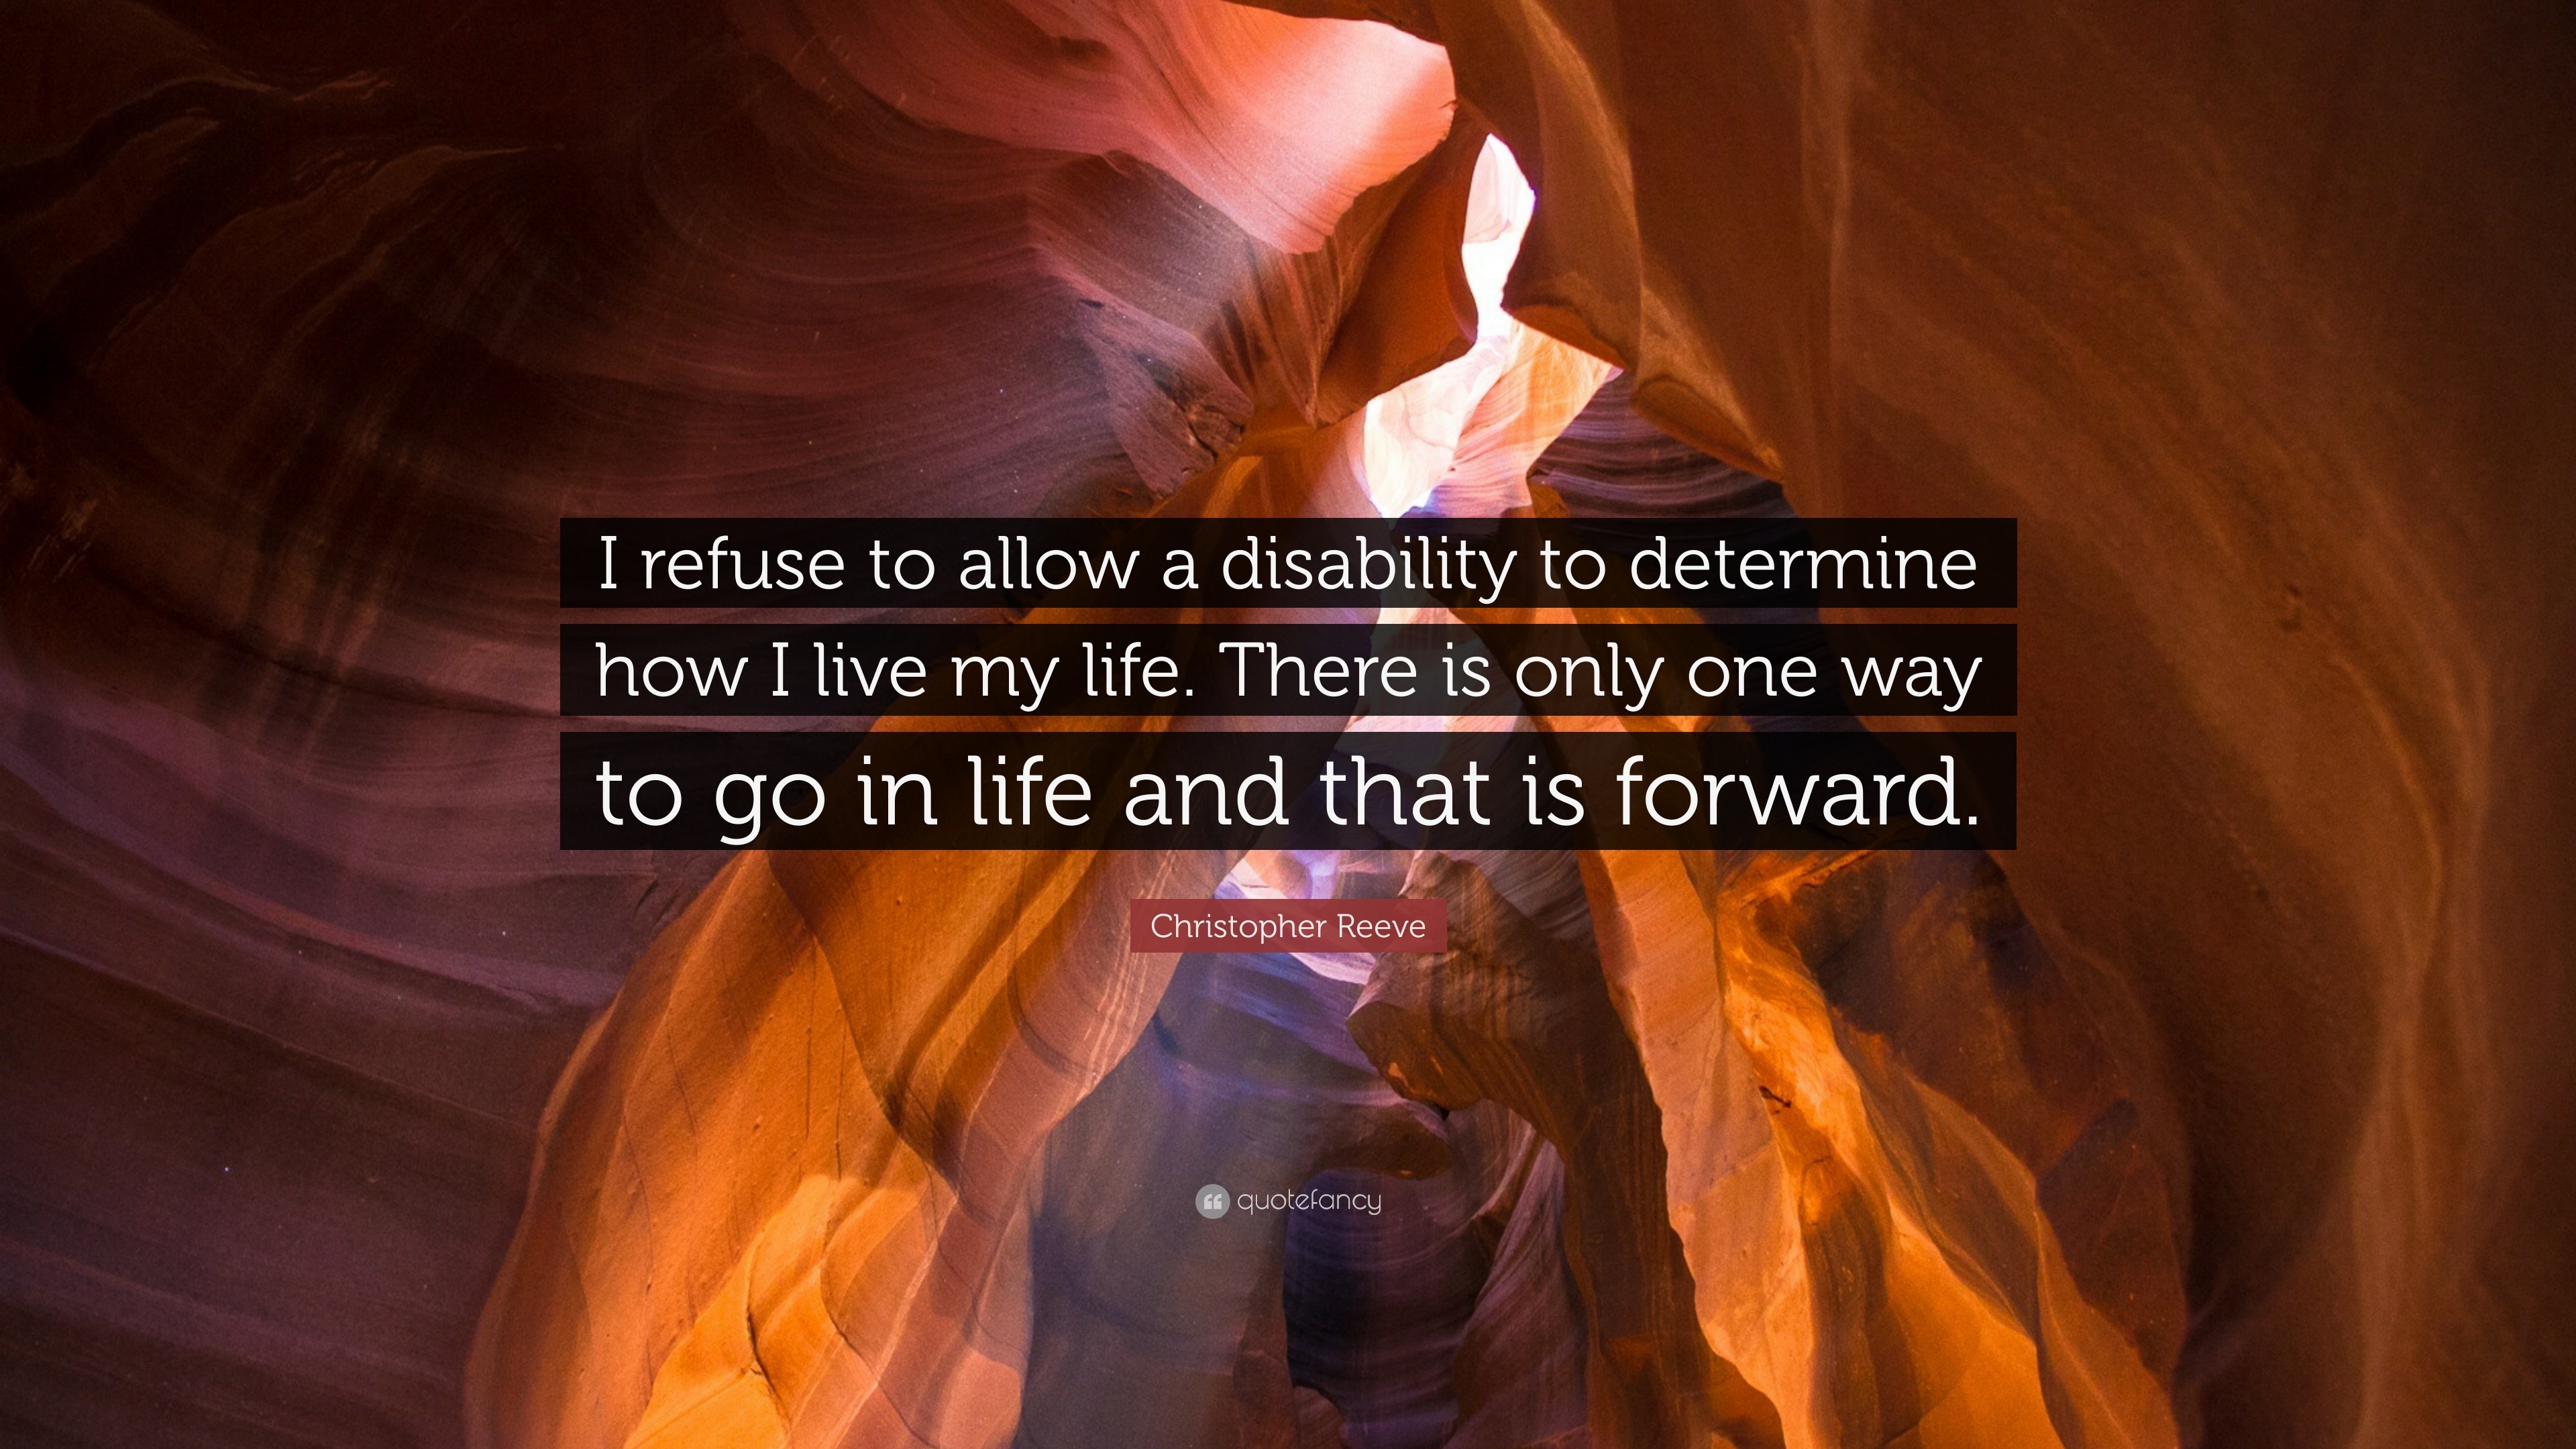 Christopher Reeve Quote I Refuse To Allow A Disability To Determine How I Live My Life